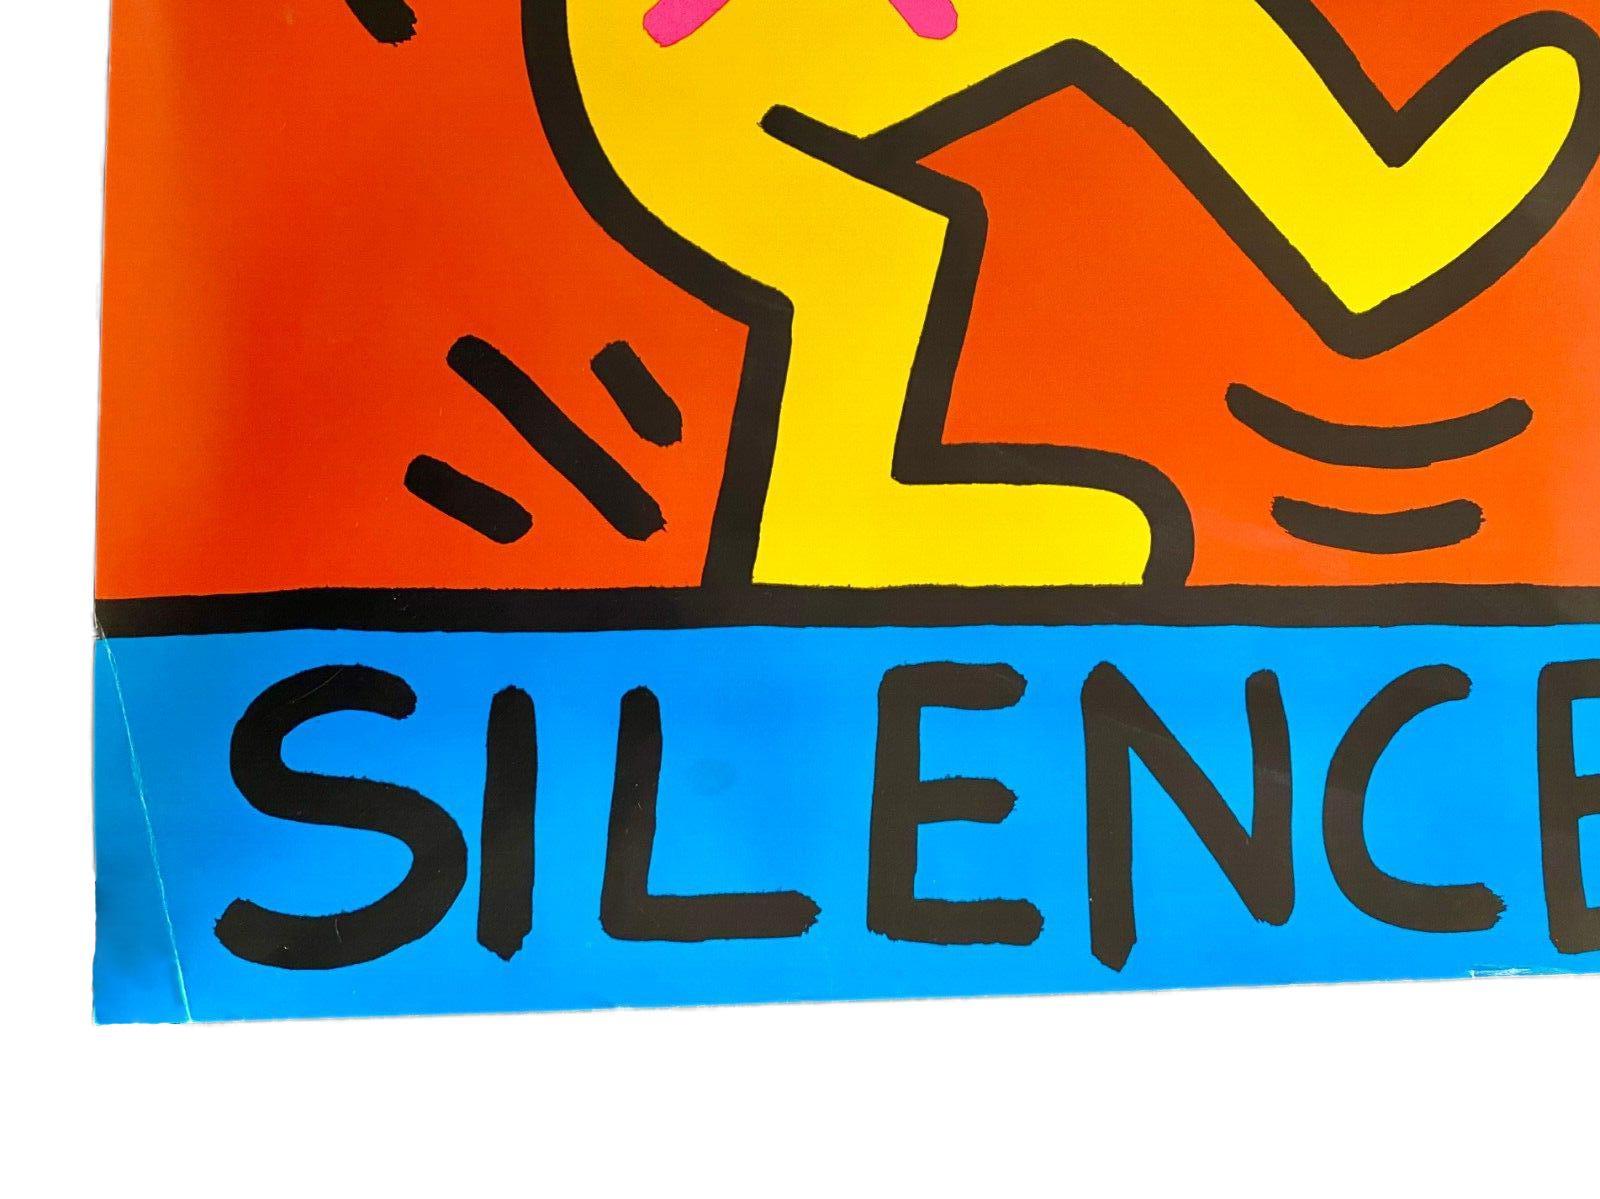 Keith Haring Ignorance = Fear, 1989 (Keith Haring Act Up poster) 1